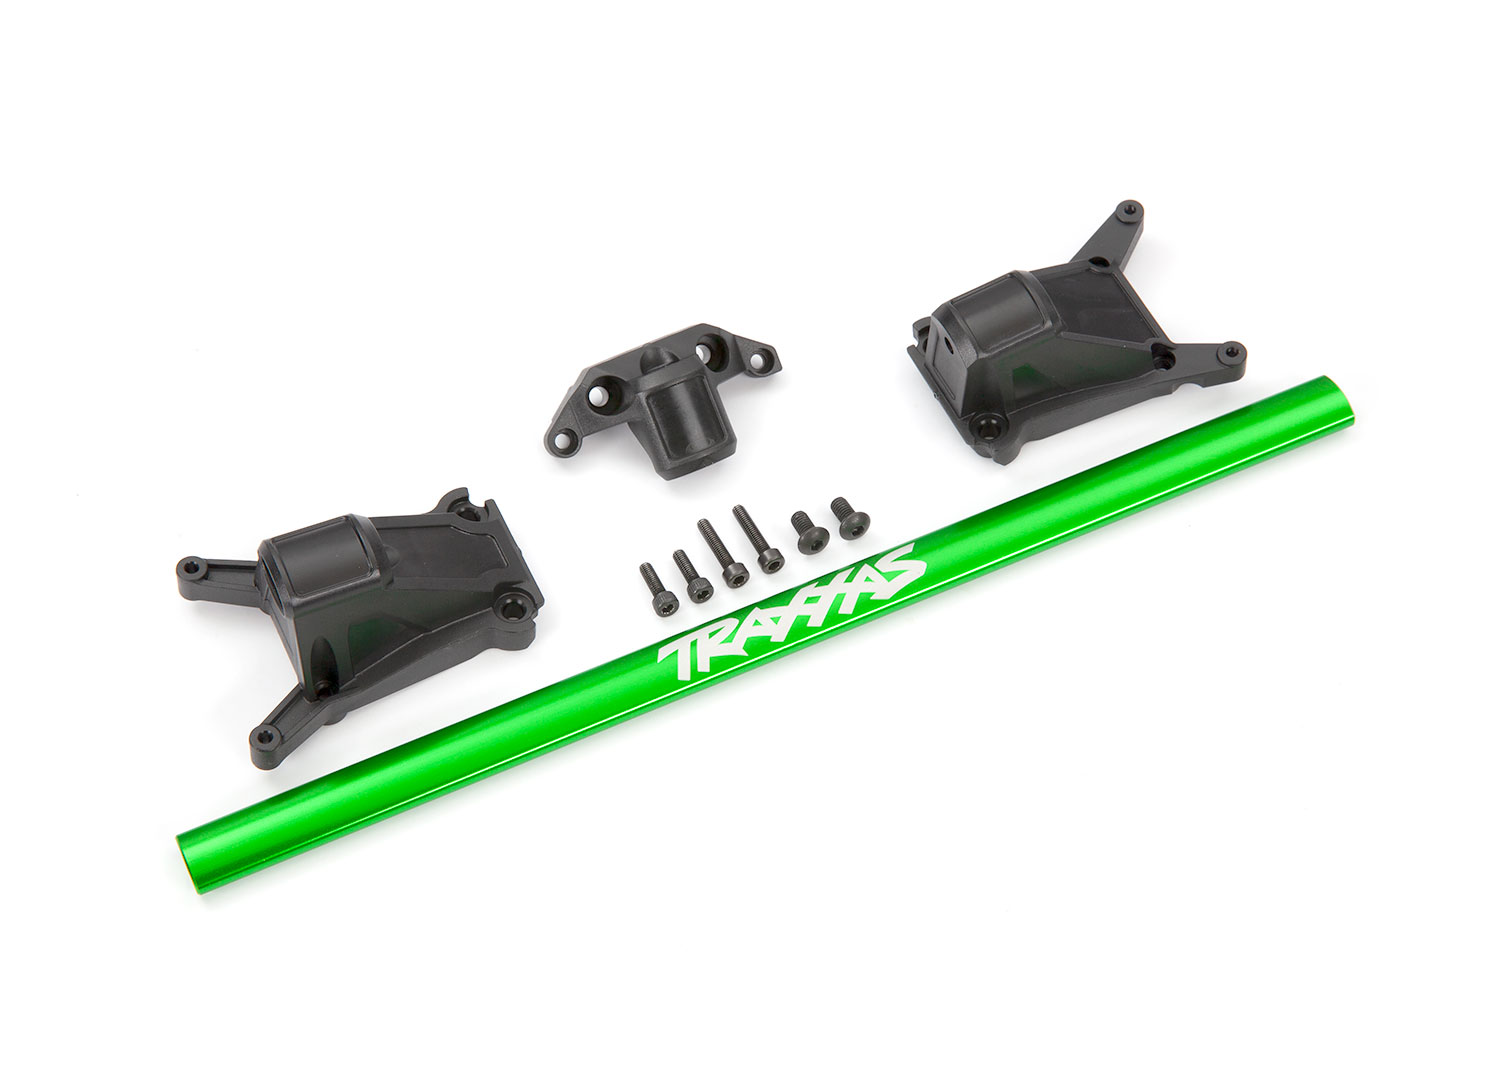 Traxxas Chassis brace kit, green (fits Rustler 4X4 or Slash 4X4 models equipped with Low-CG chassis) - TRX6730G